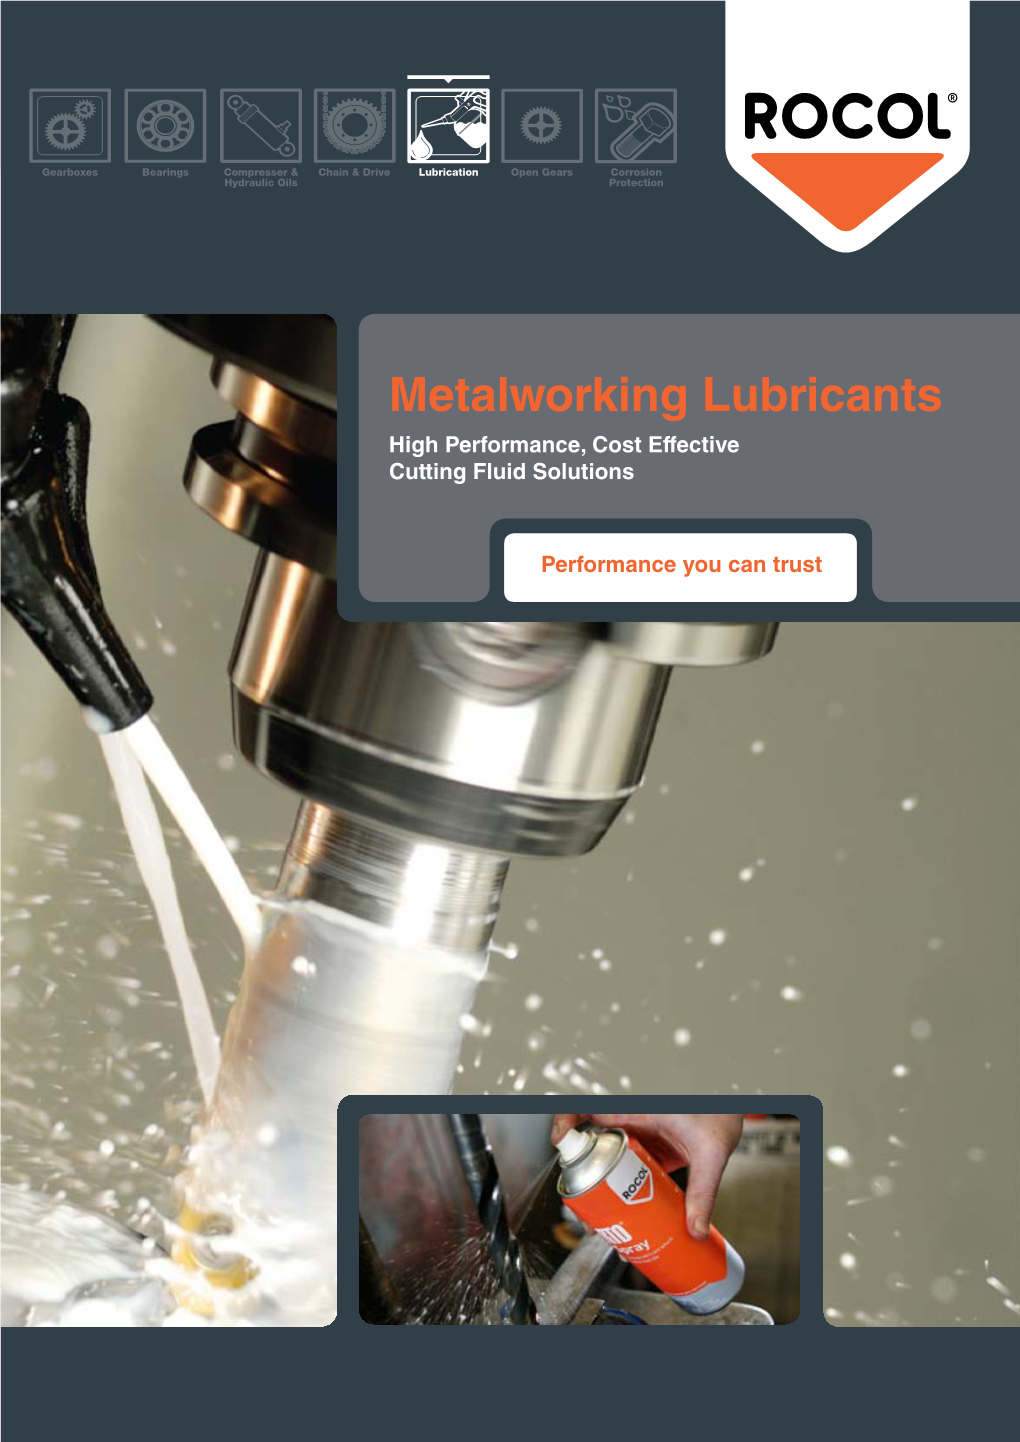 Metalworking Lubricants High Performance, Cost Effective Cutting Fluid Solutions